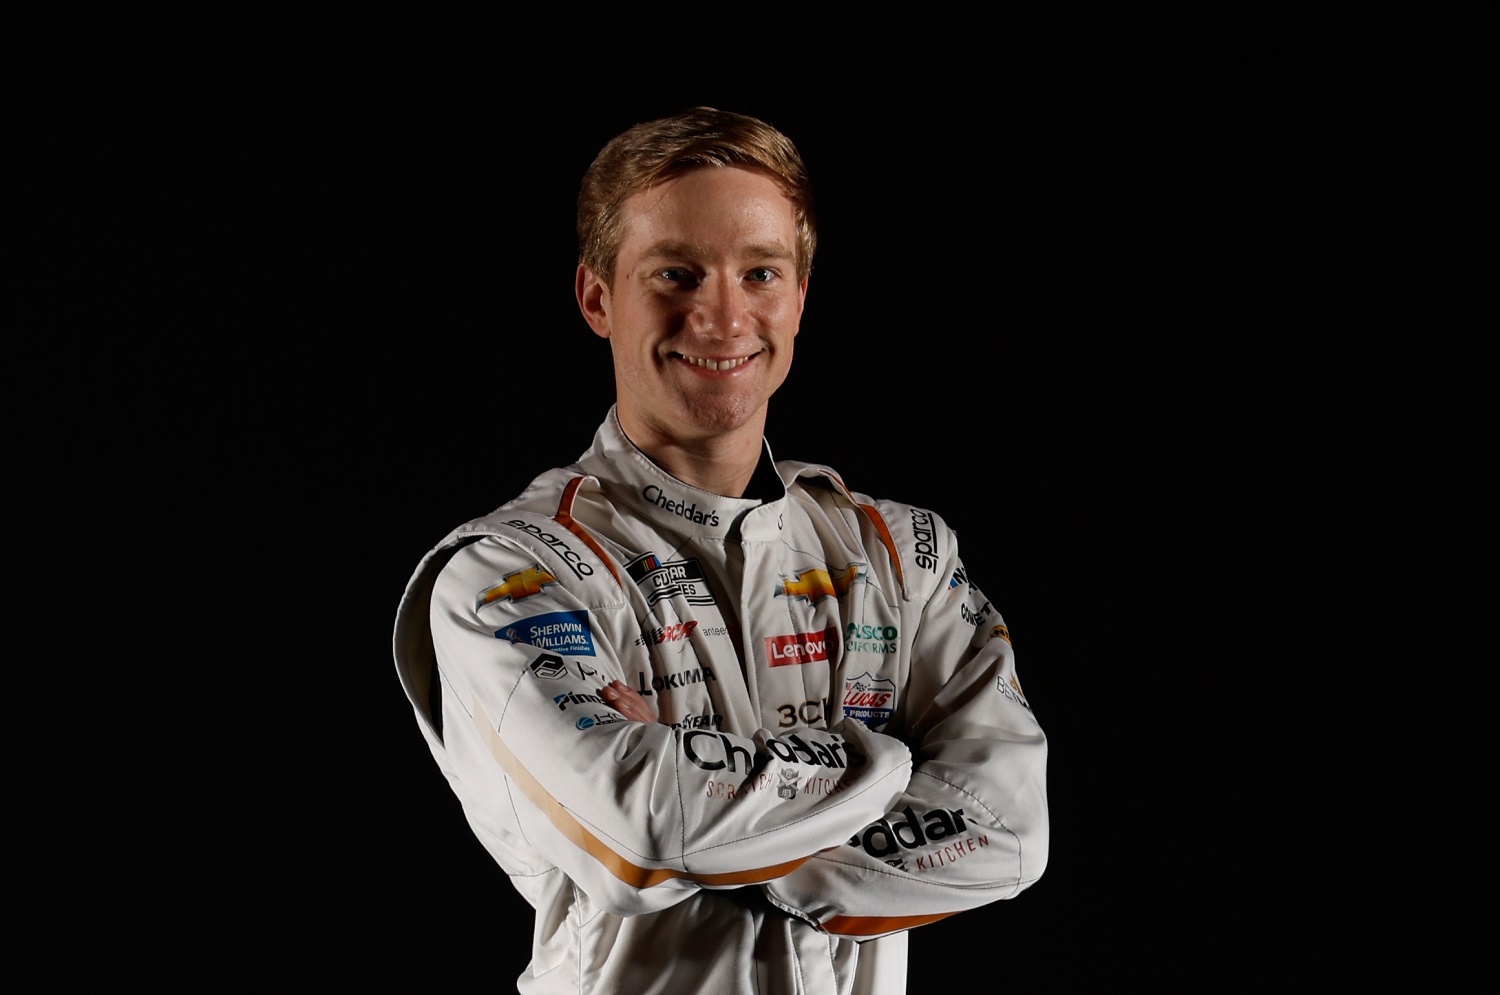 NASCAR driver Tyler Reddick poses for a photo during NASCAR Production Days at Clutch Studios on Jan. 19, 2022 | Chris Graythen/Getty Images